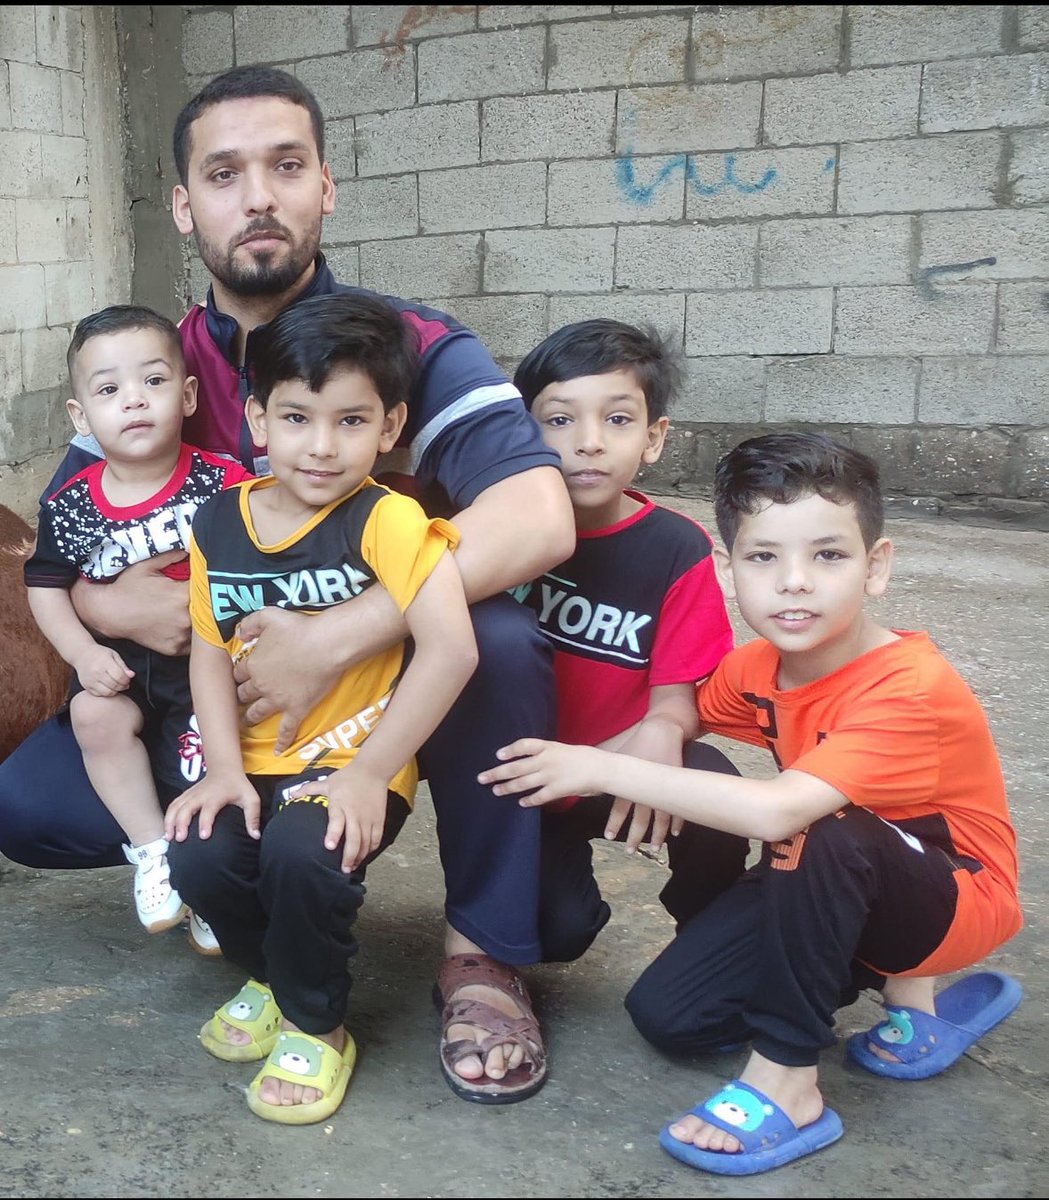 The family of Ahmed Hamad has been wiped off the Palestinian civil registry following an Israeli airstrike that killed him, along with his wife and their four children in Gaza.